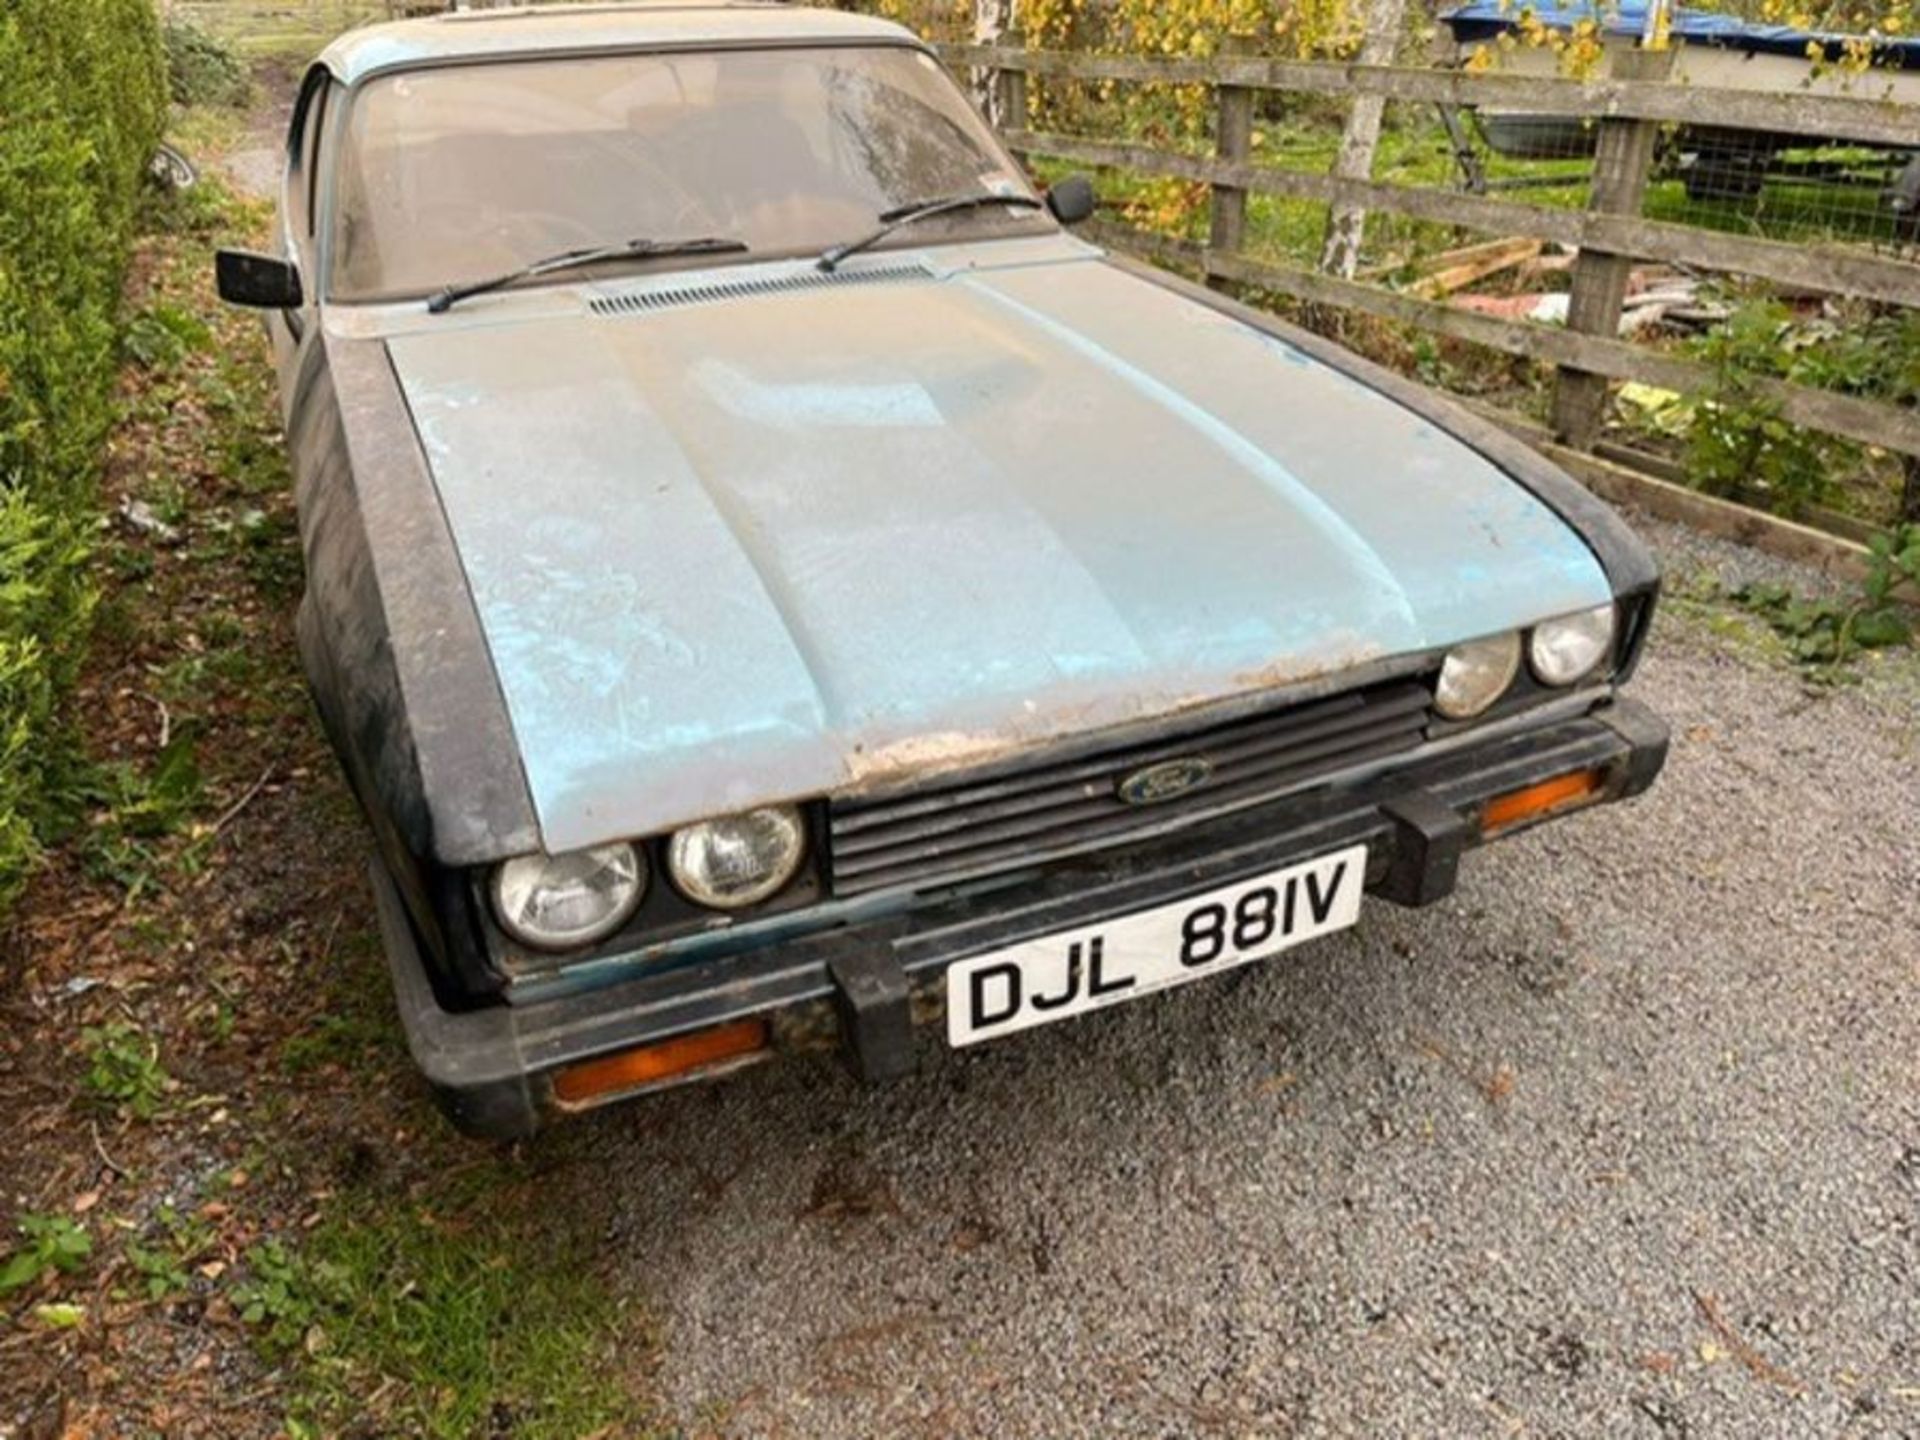 1979 Ford Capri 3.0s MkIII manual Although running and driving, this 4 speed manual 3.0s is - Image 28 of 168